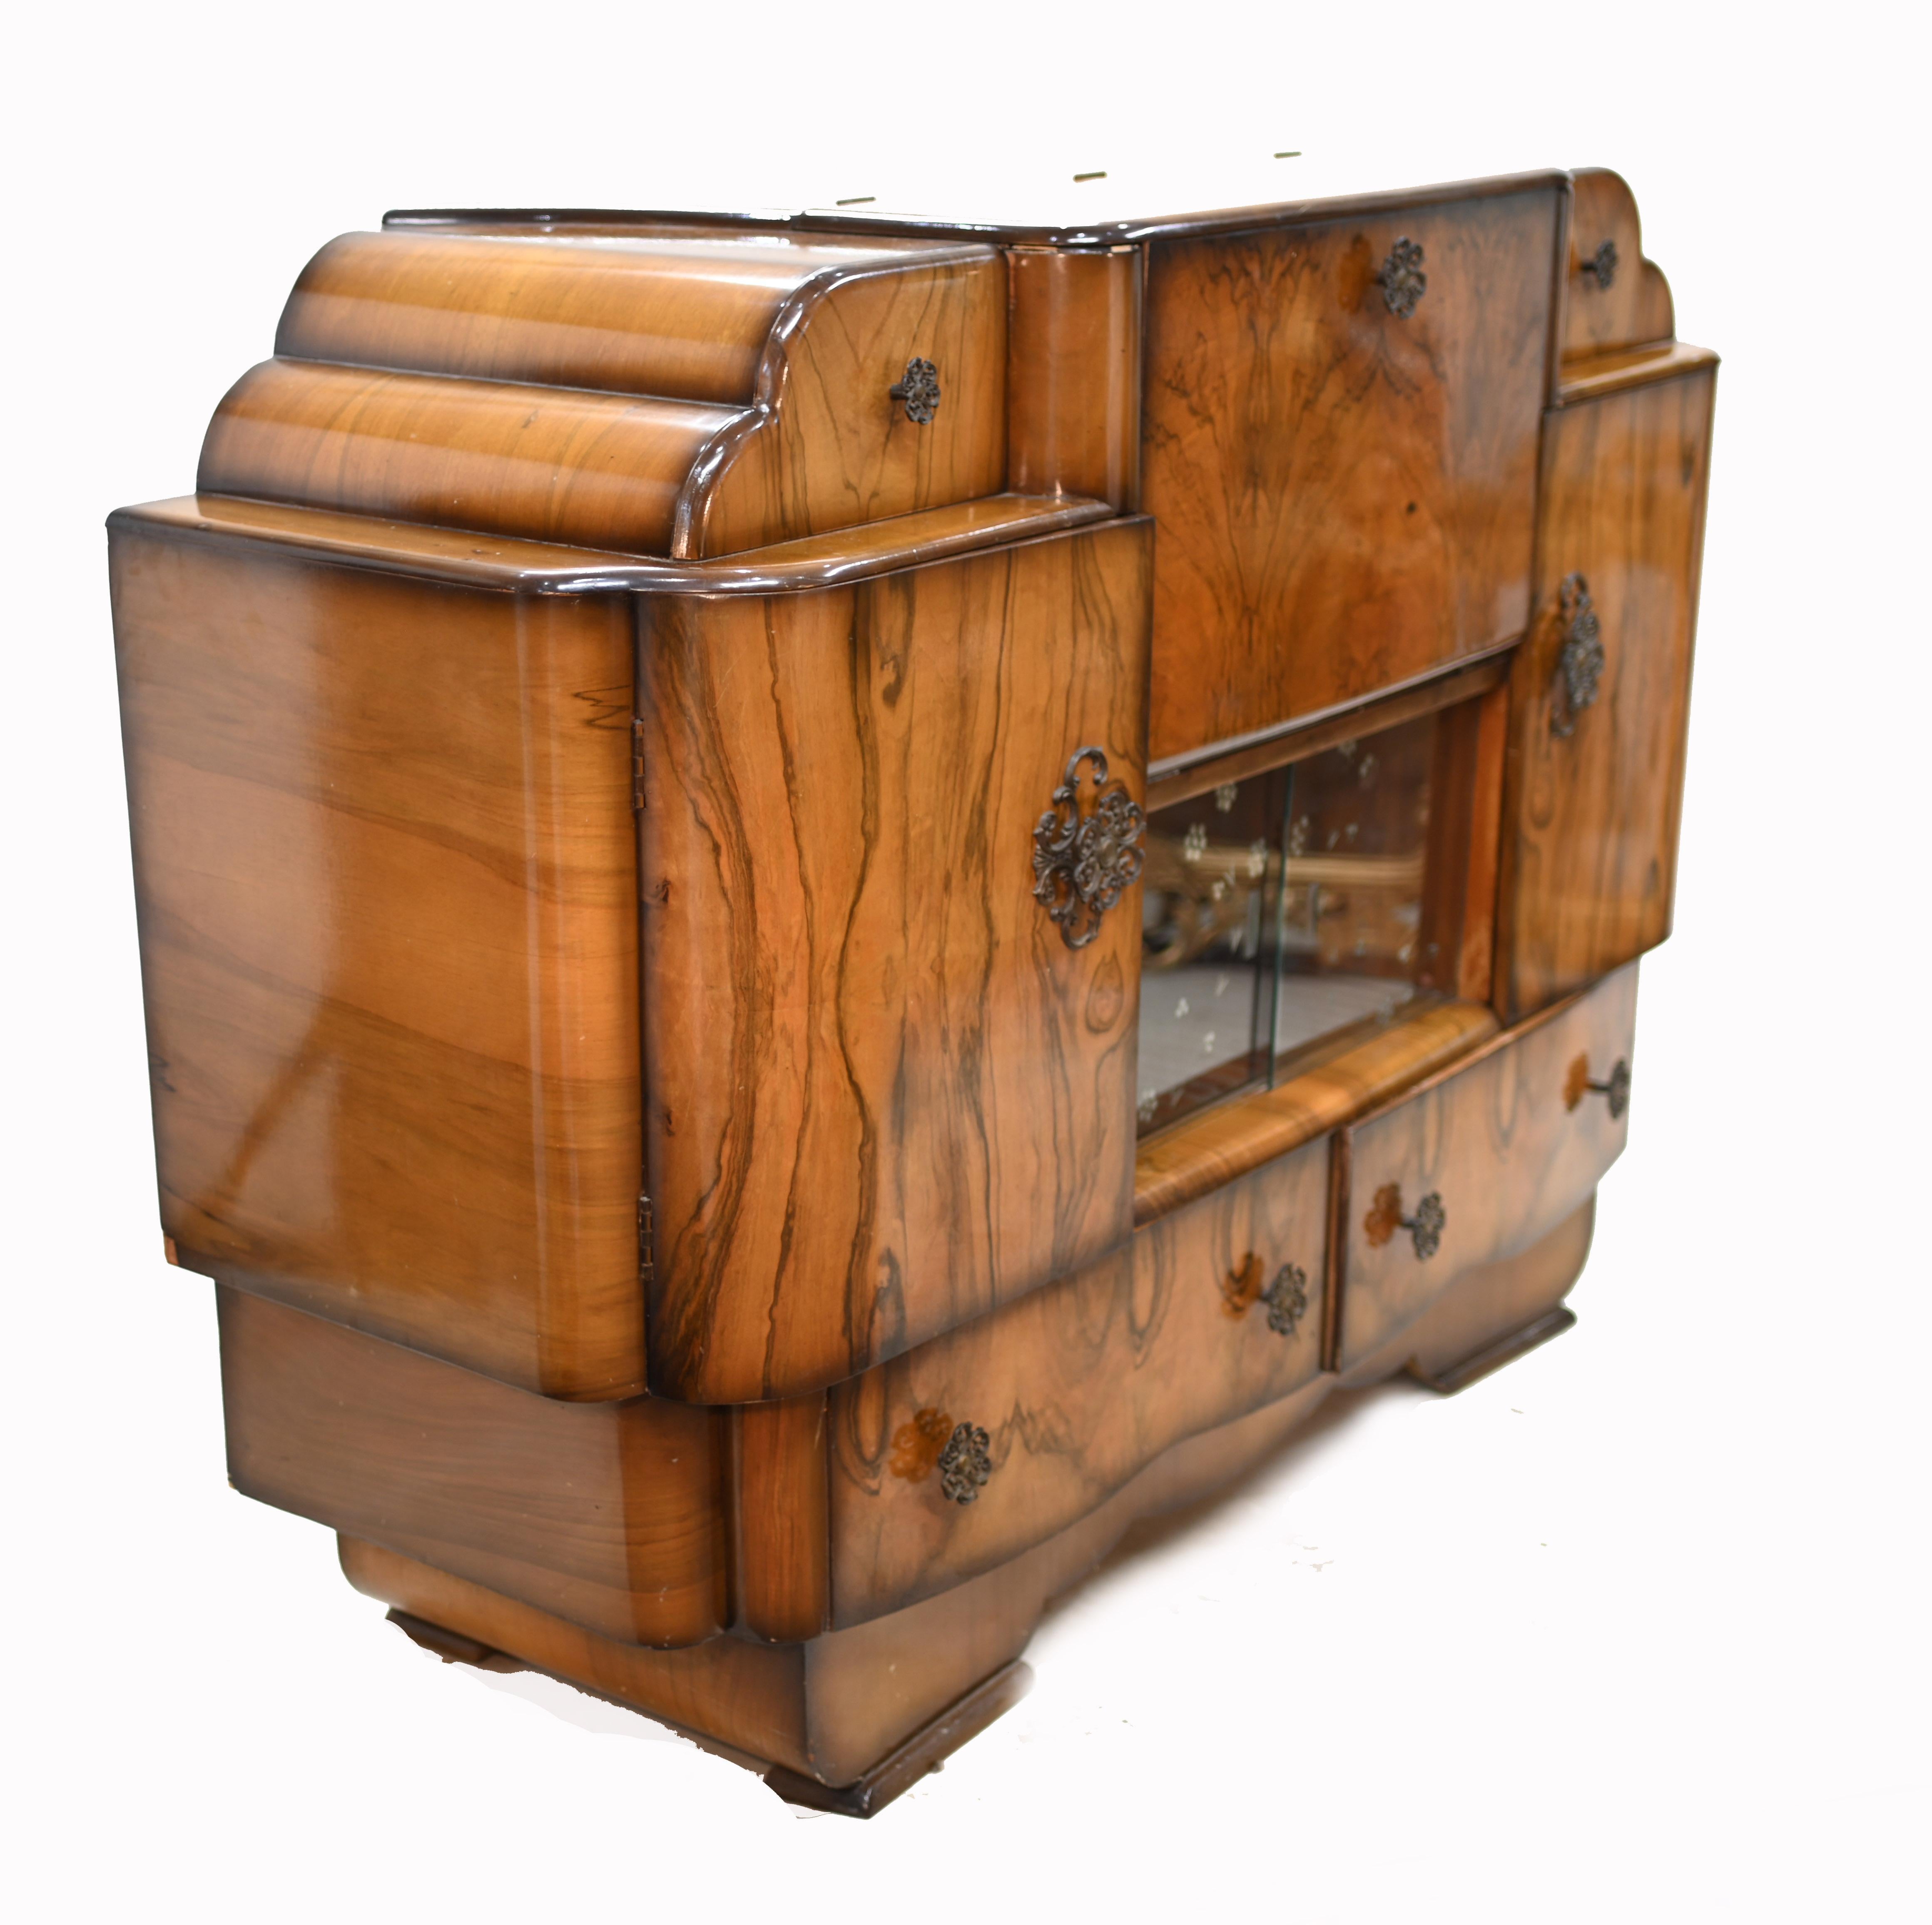 English Period Art Deco Cocktail Cabinet Vintage Drinks Chest 1930